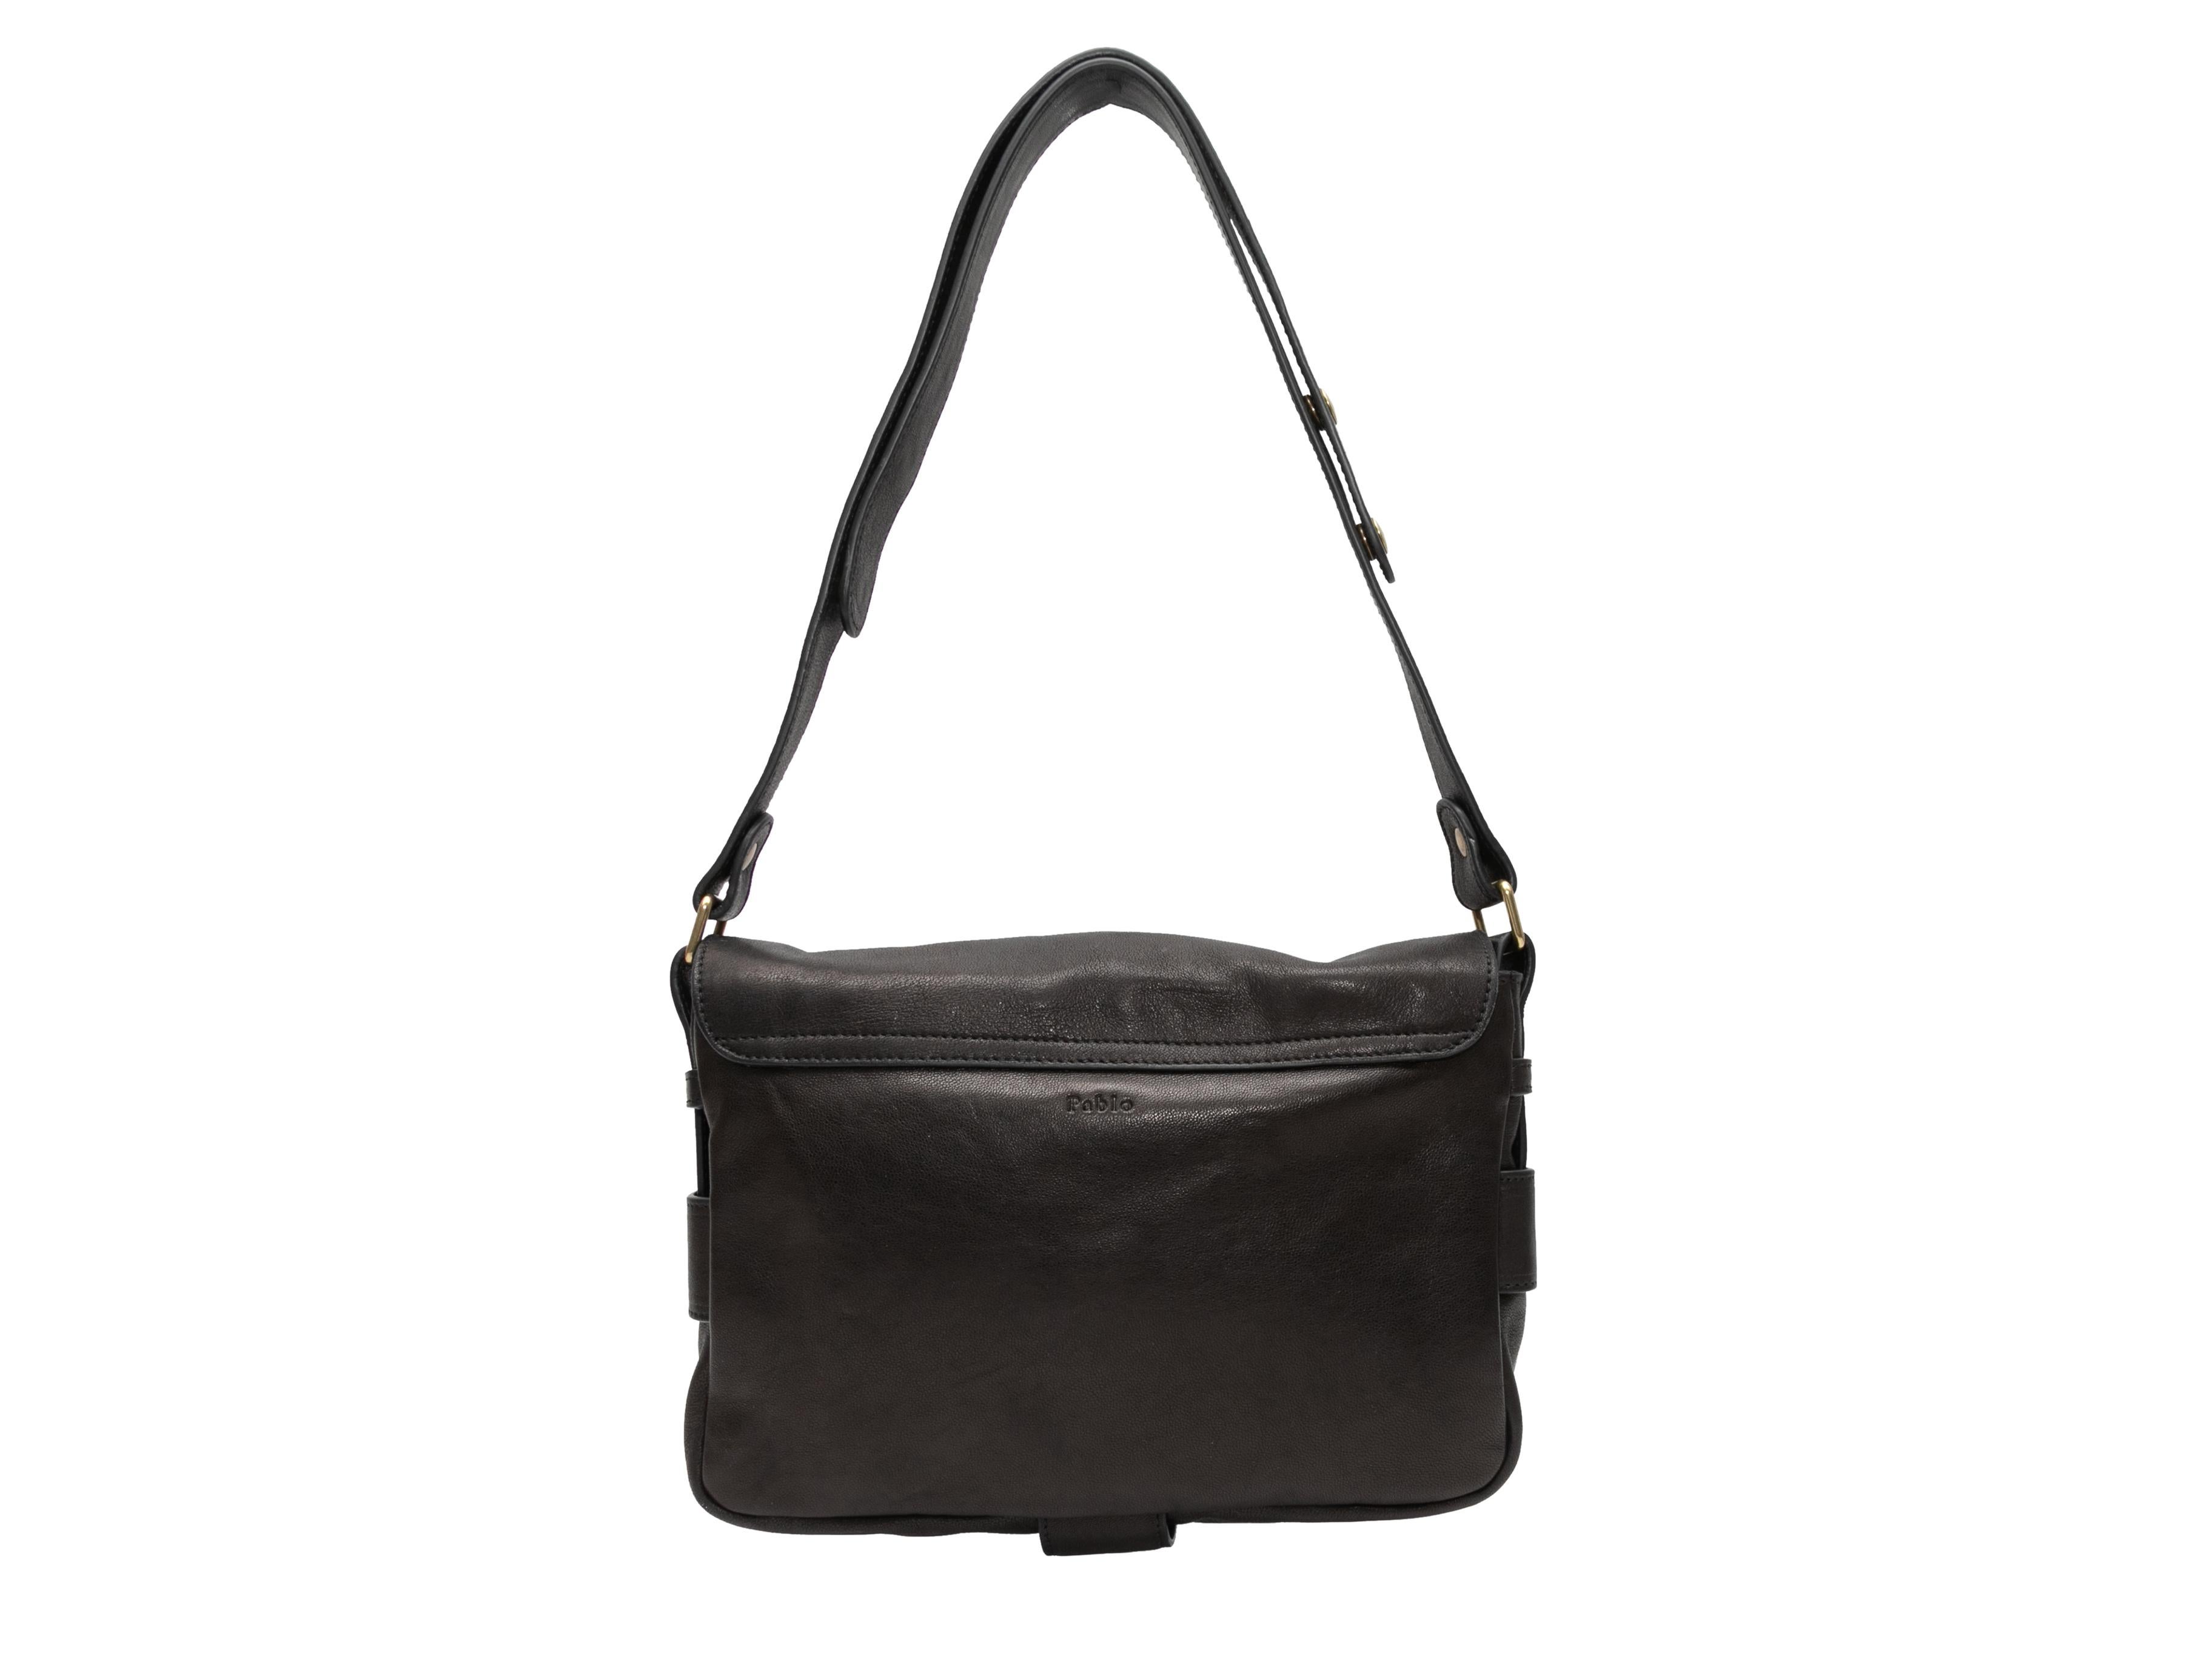 Black Pablo Paris Leather Shoulder Bag In Good Condition For Sale In New York, NY